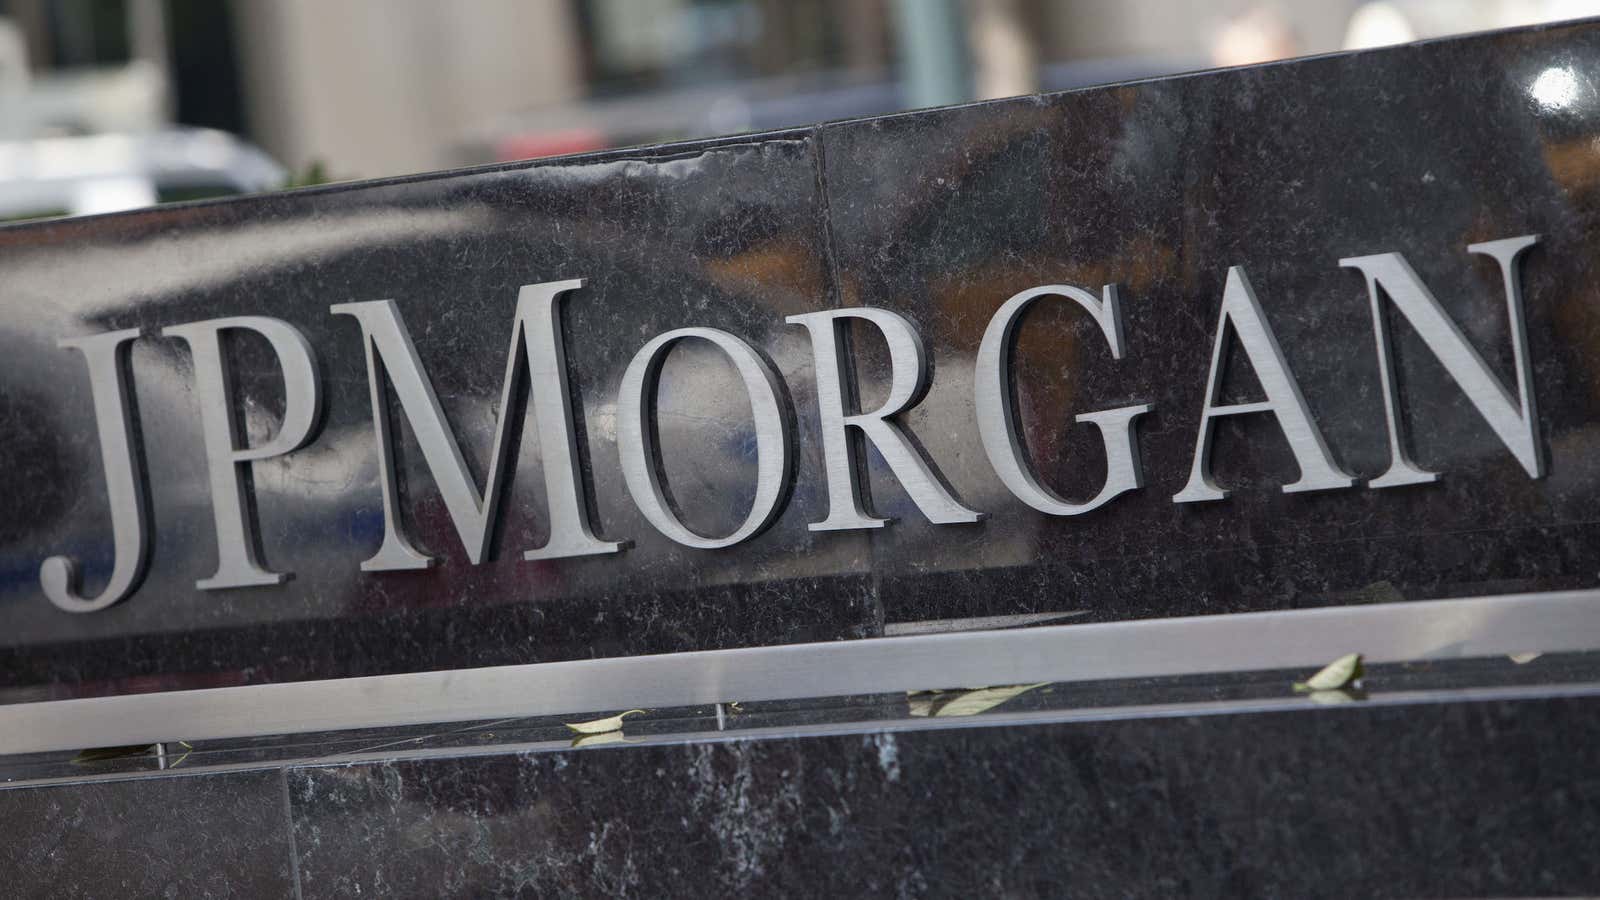 JPMorgan may be worried about  startups, but it’s not going down easy.